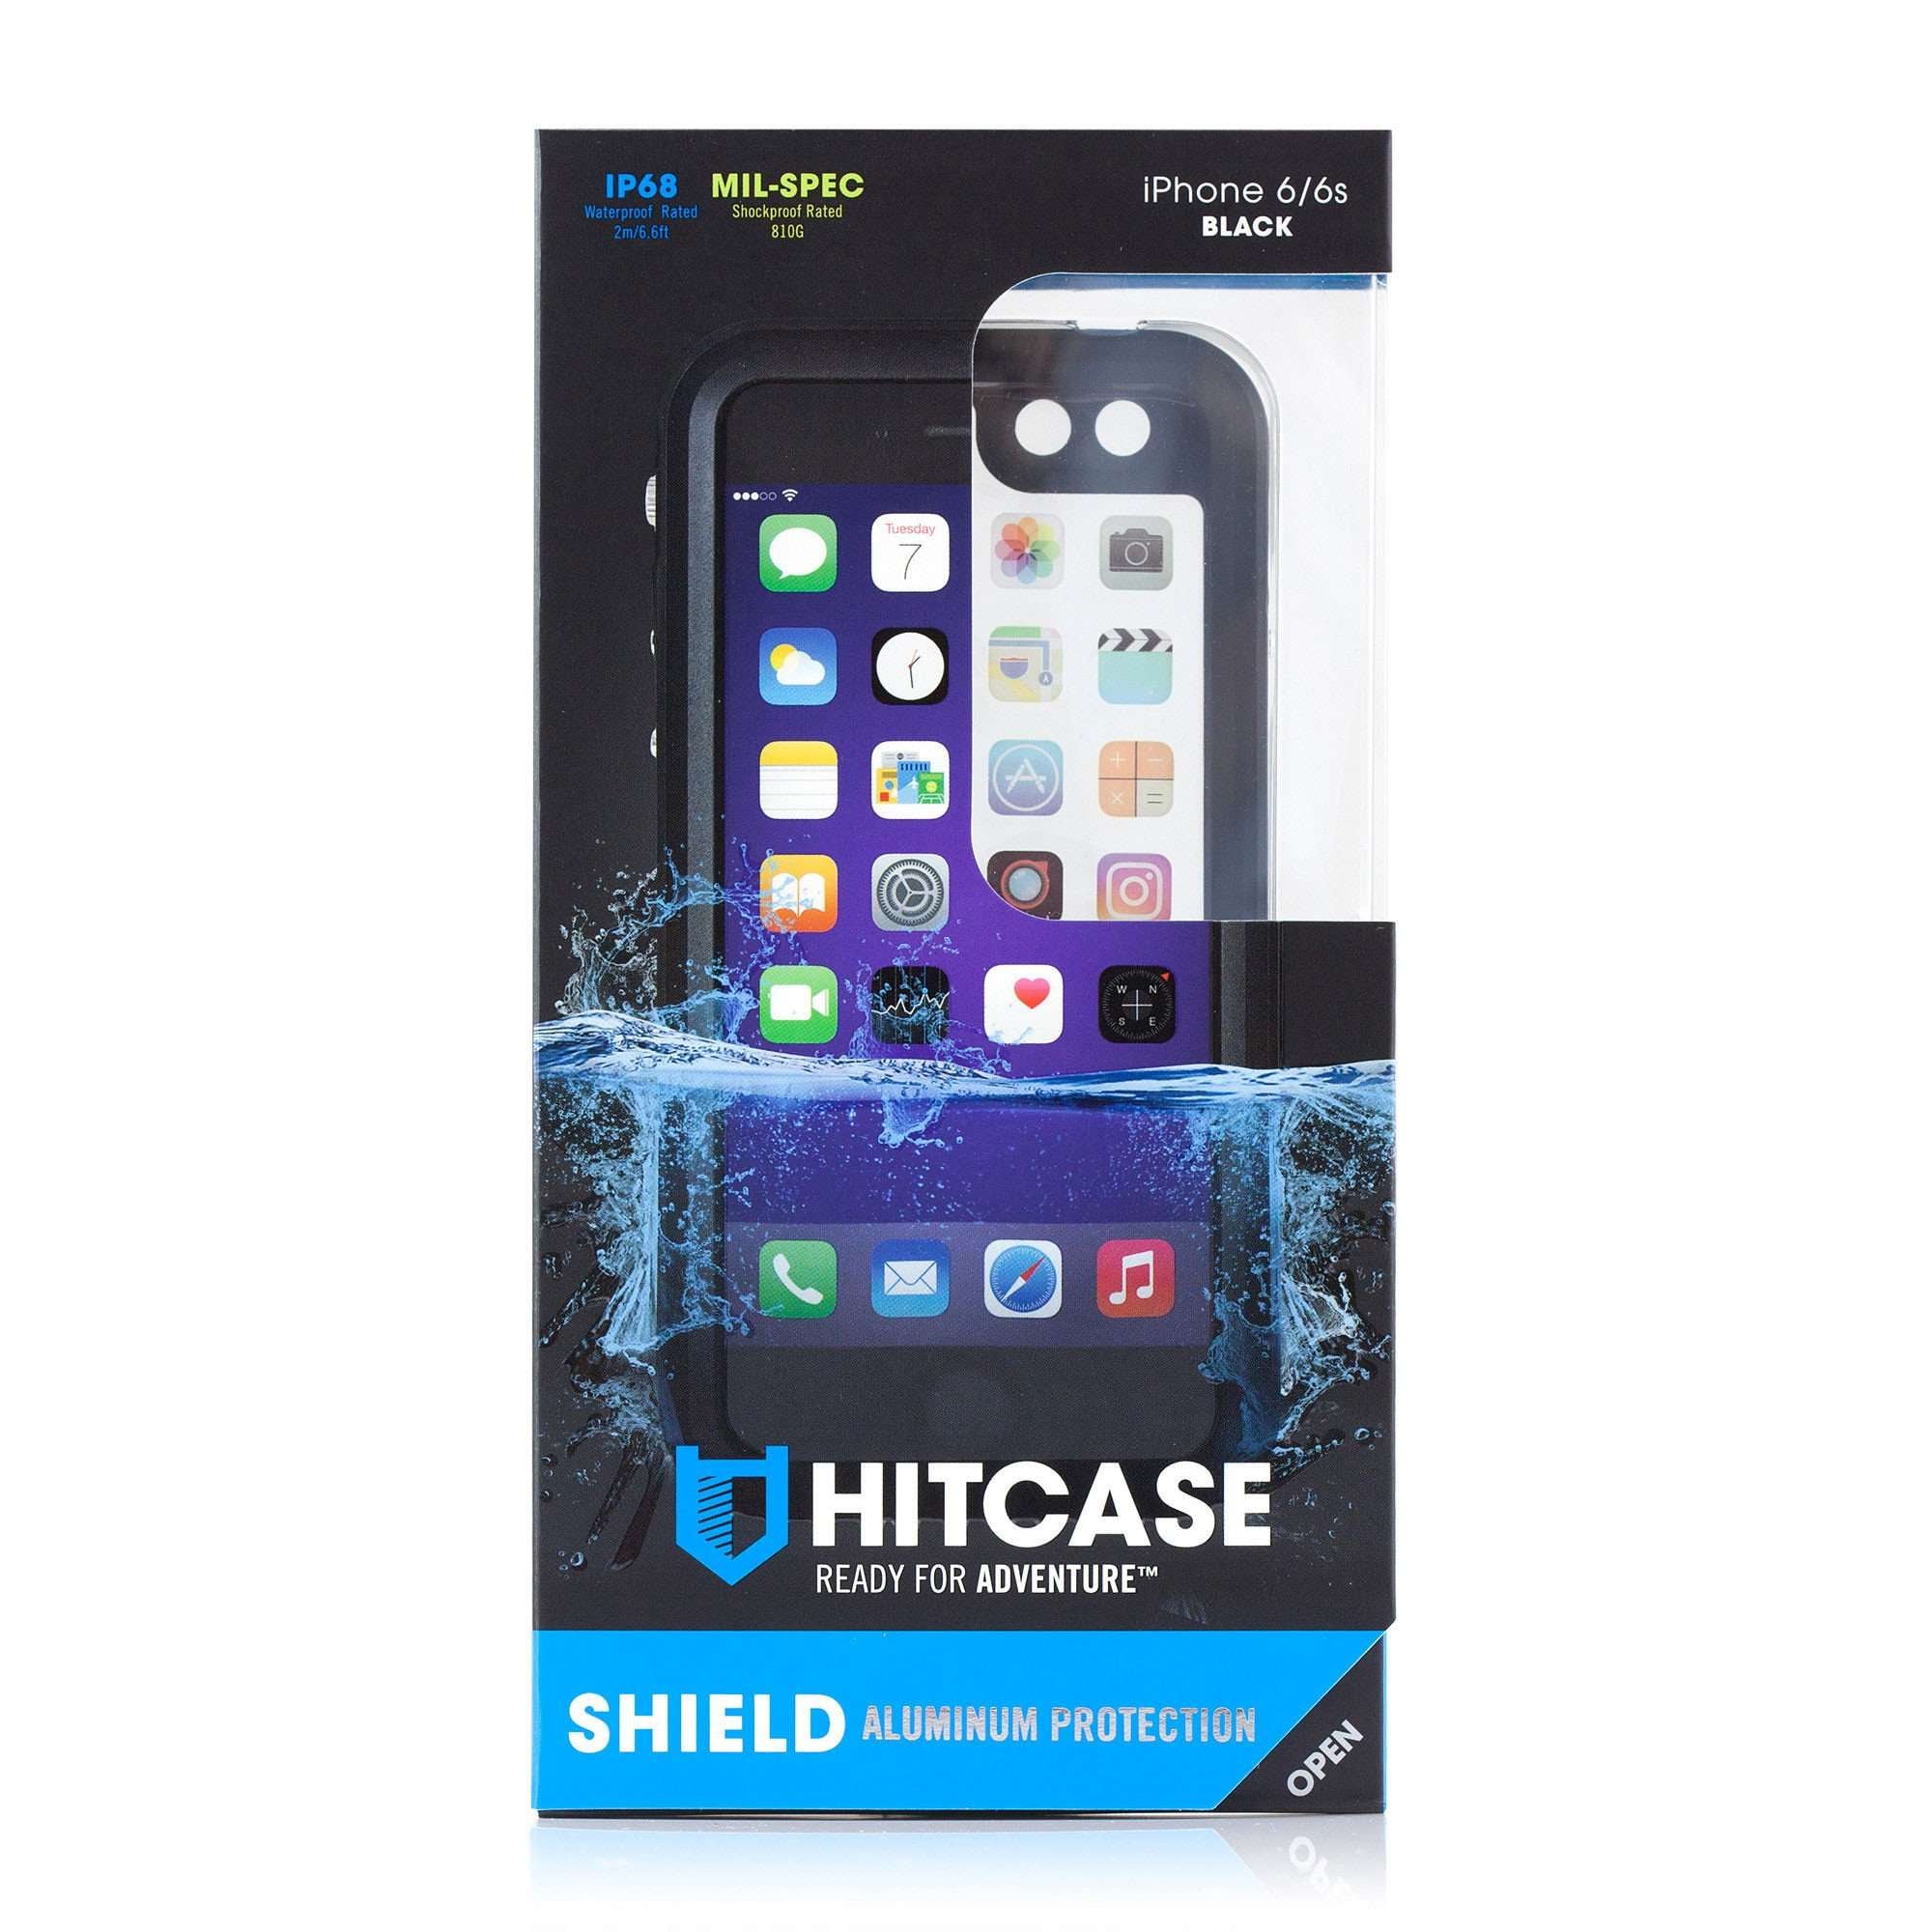 Shield: Metal Travel Case for iPhone 6/6s - Hitcase